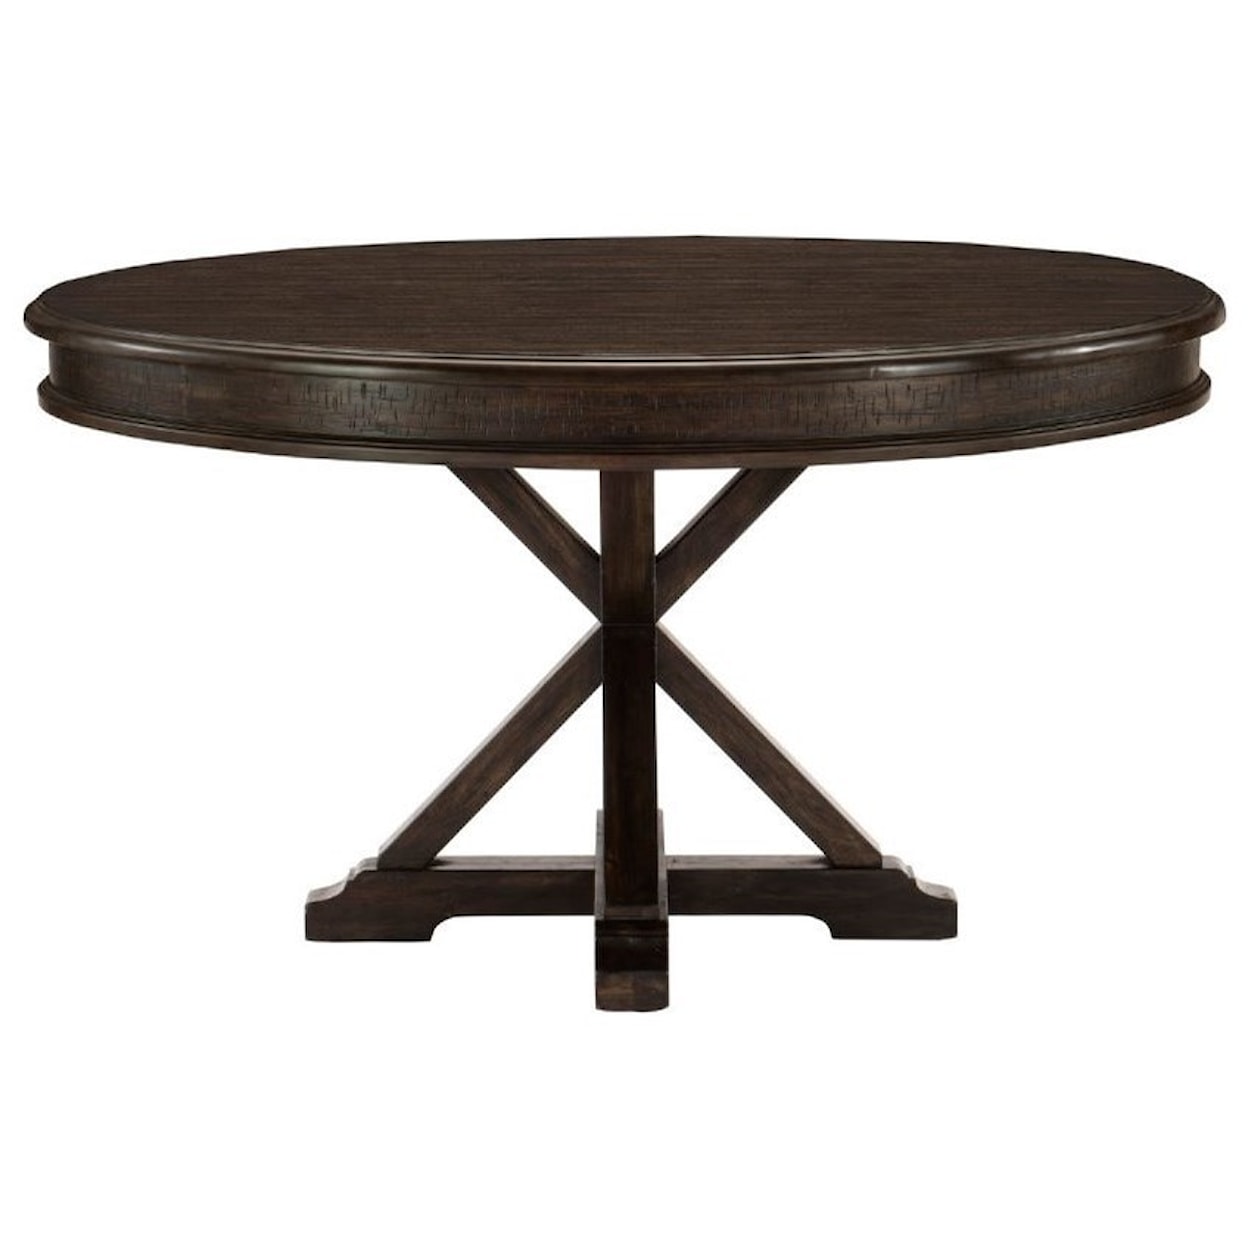 Homelegance Furniture Cardano Round Dining Table